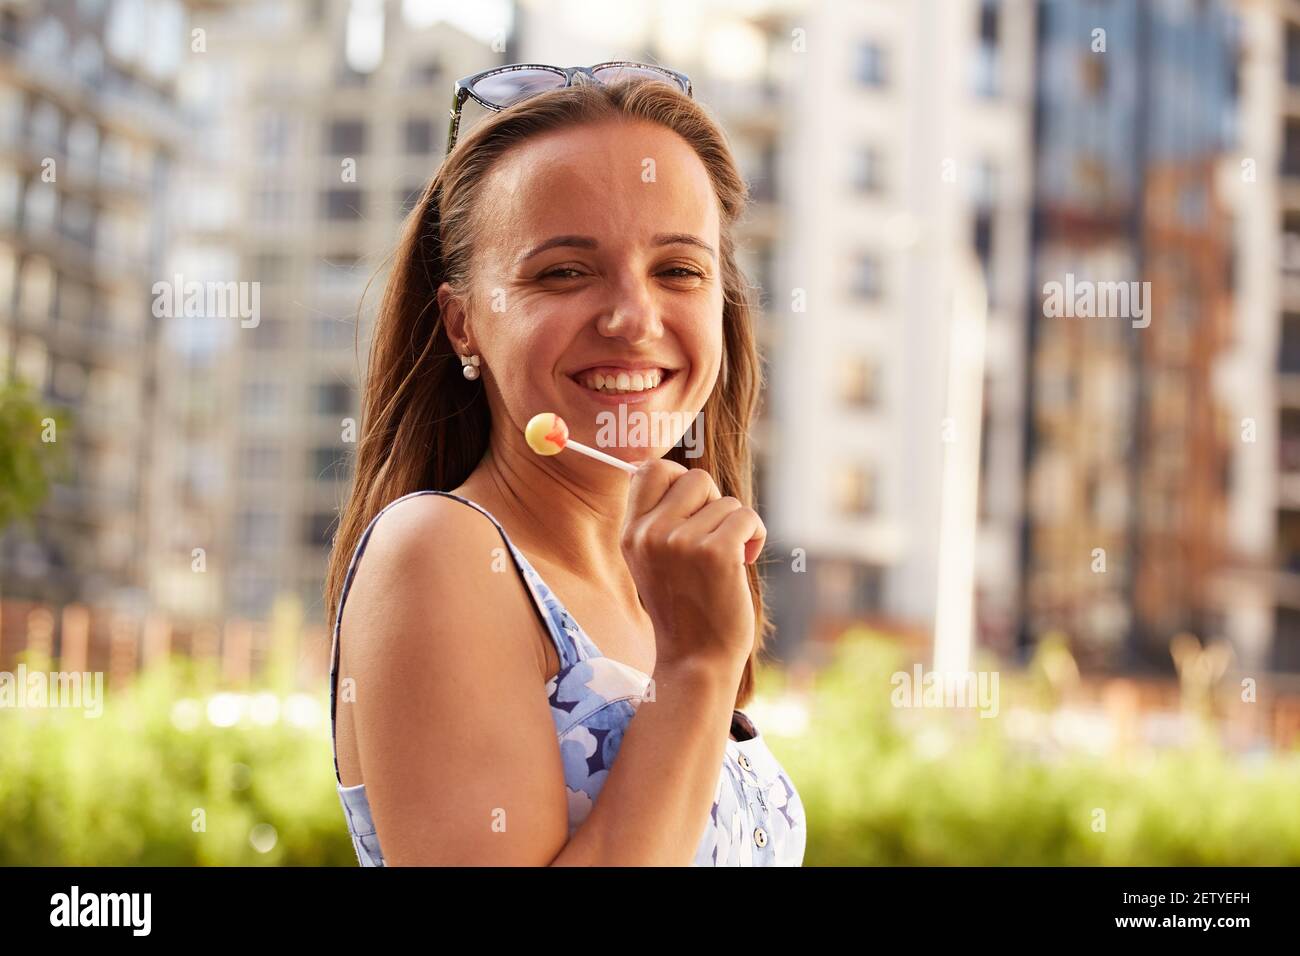 happy young woman with lollipop looking at camera Stock Photo